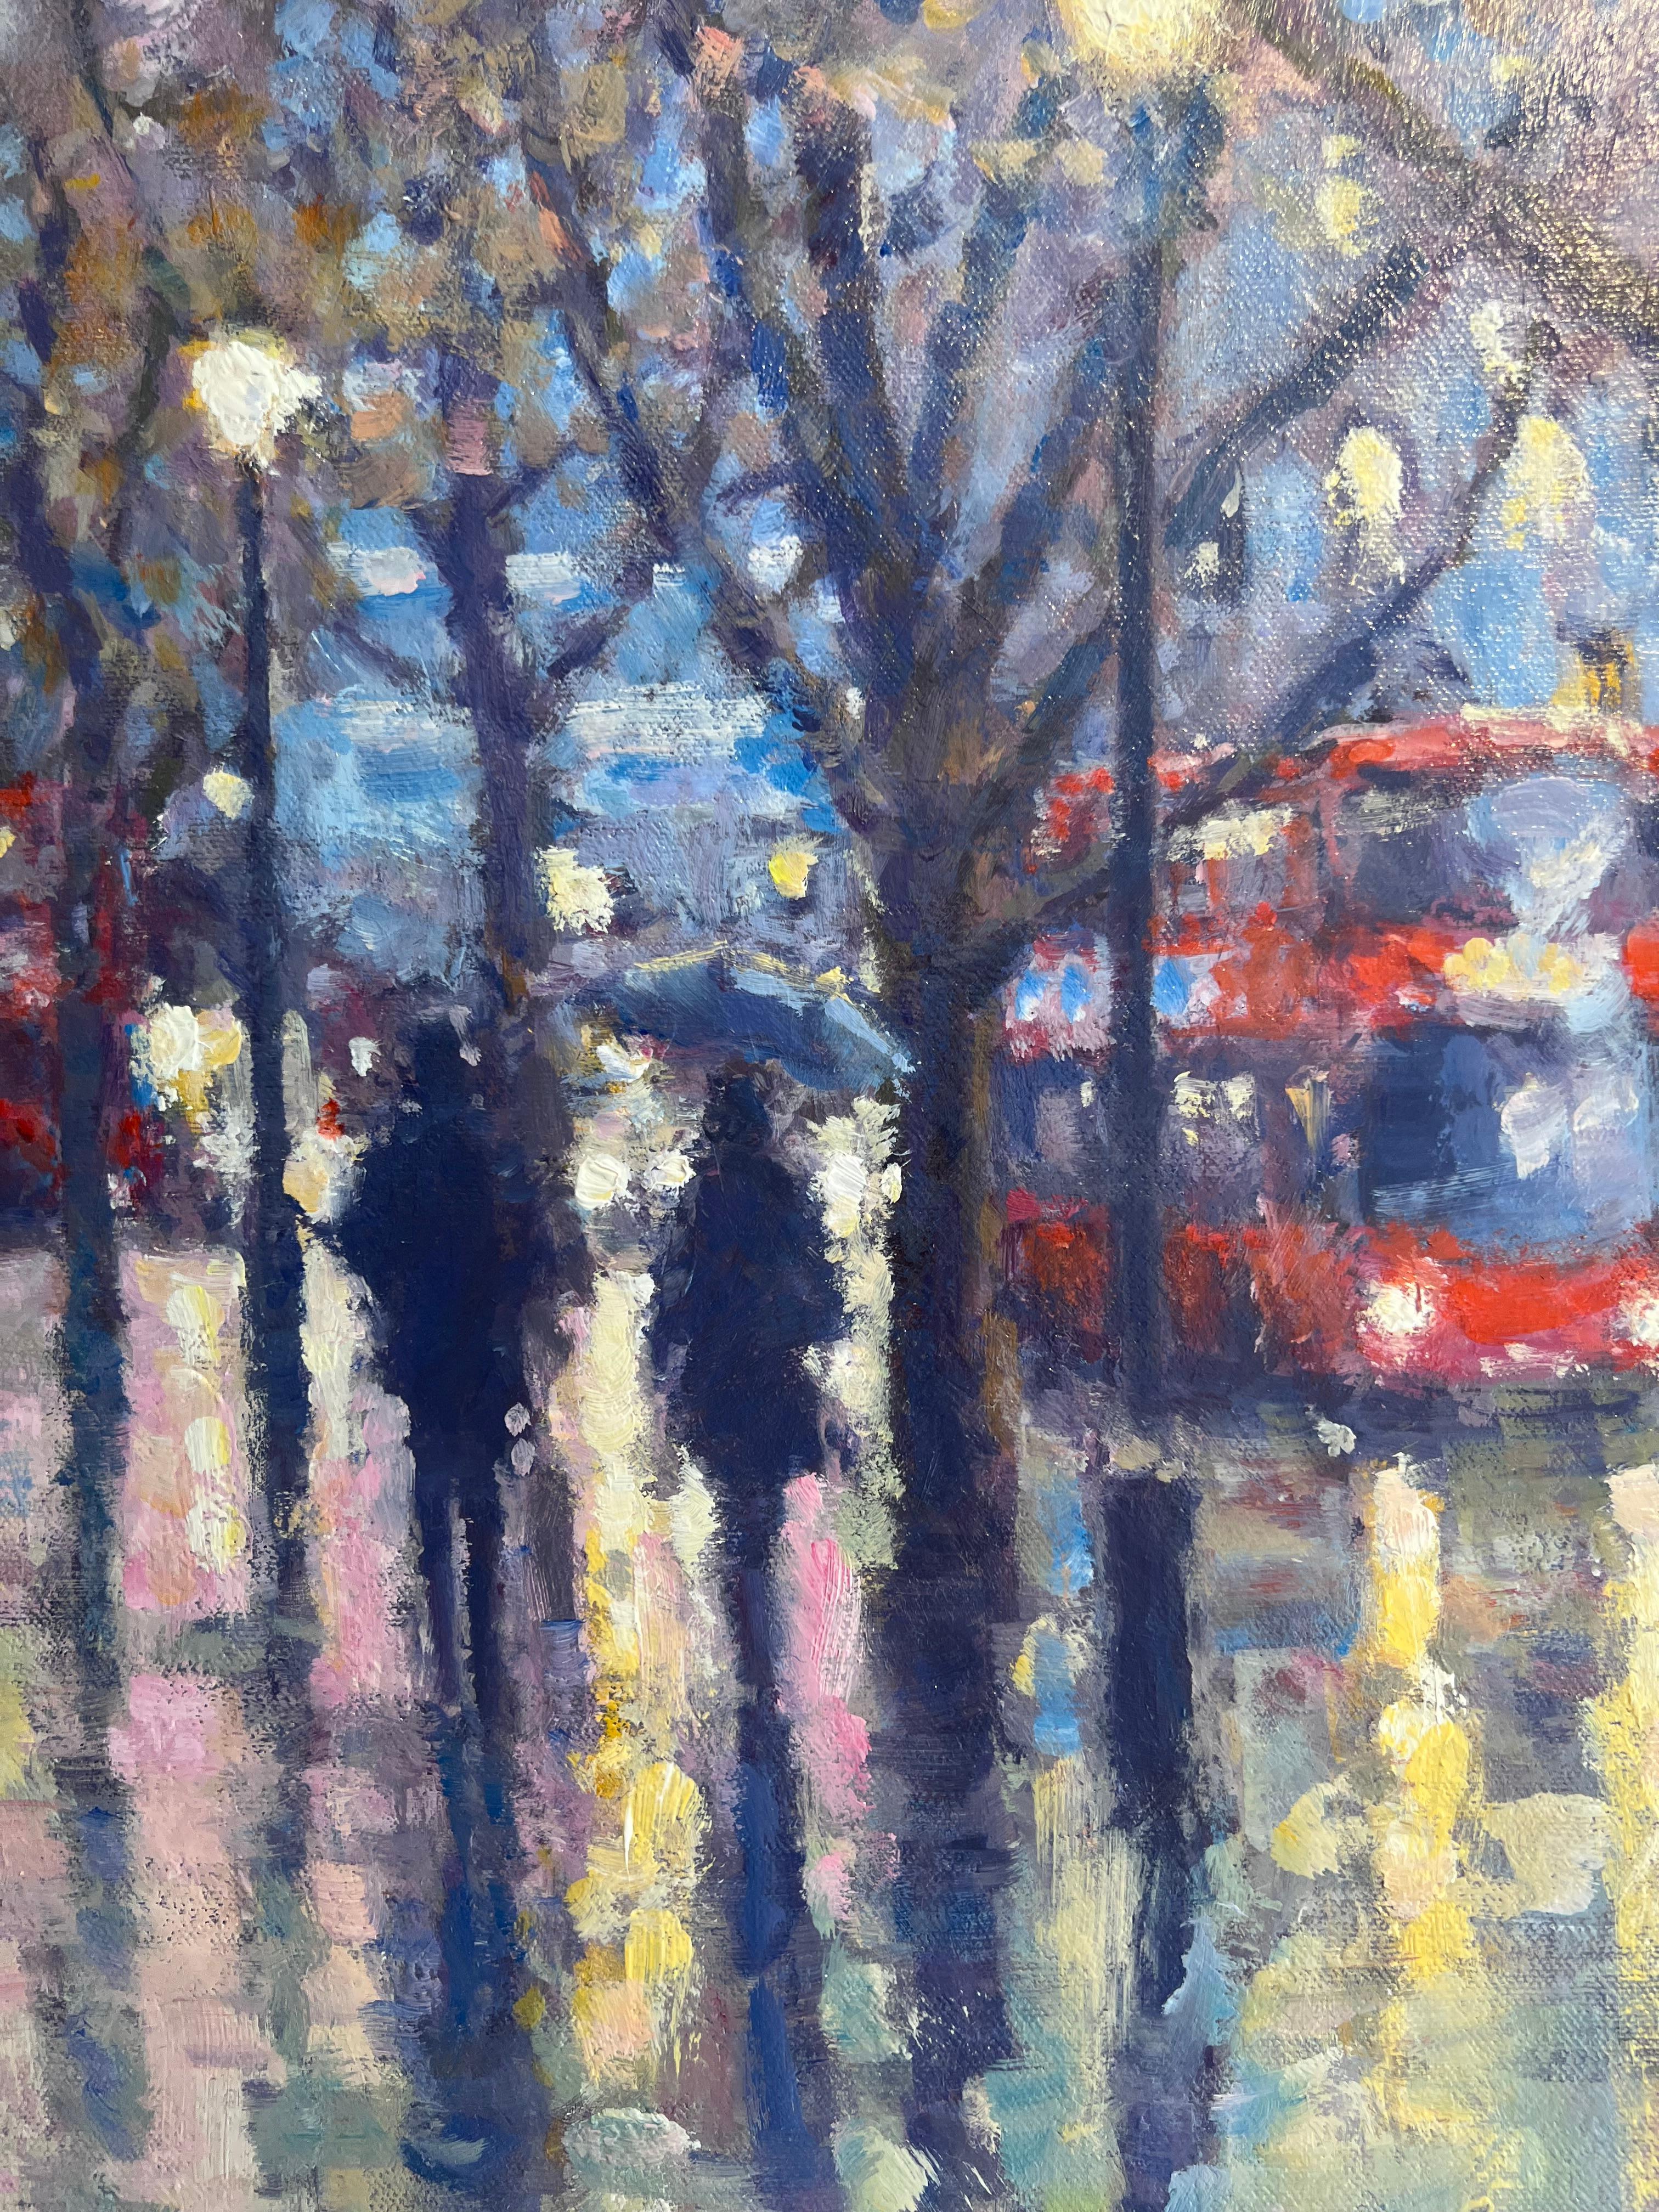 Early Evening Sloane Square - original impressionism London cityscape painting - Impressionist Painting by David Farren